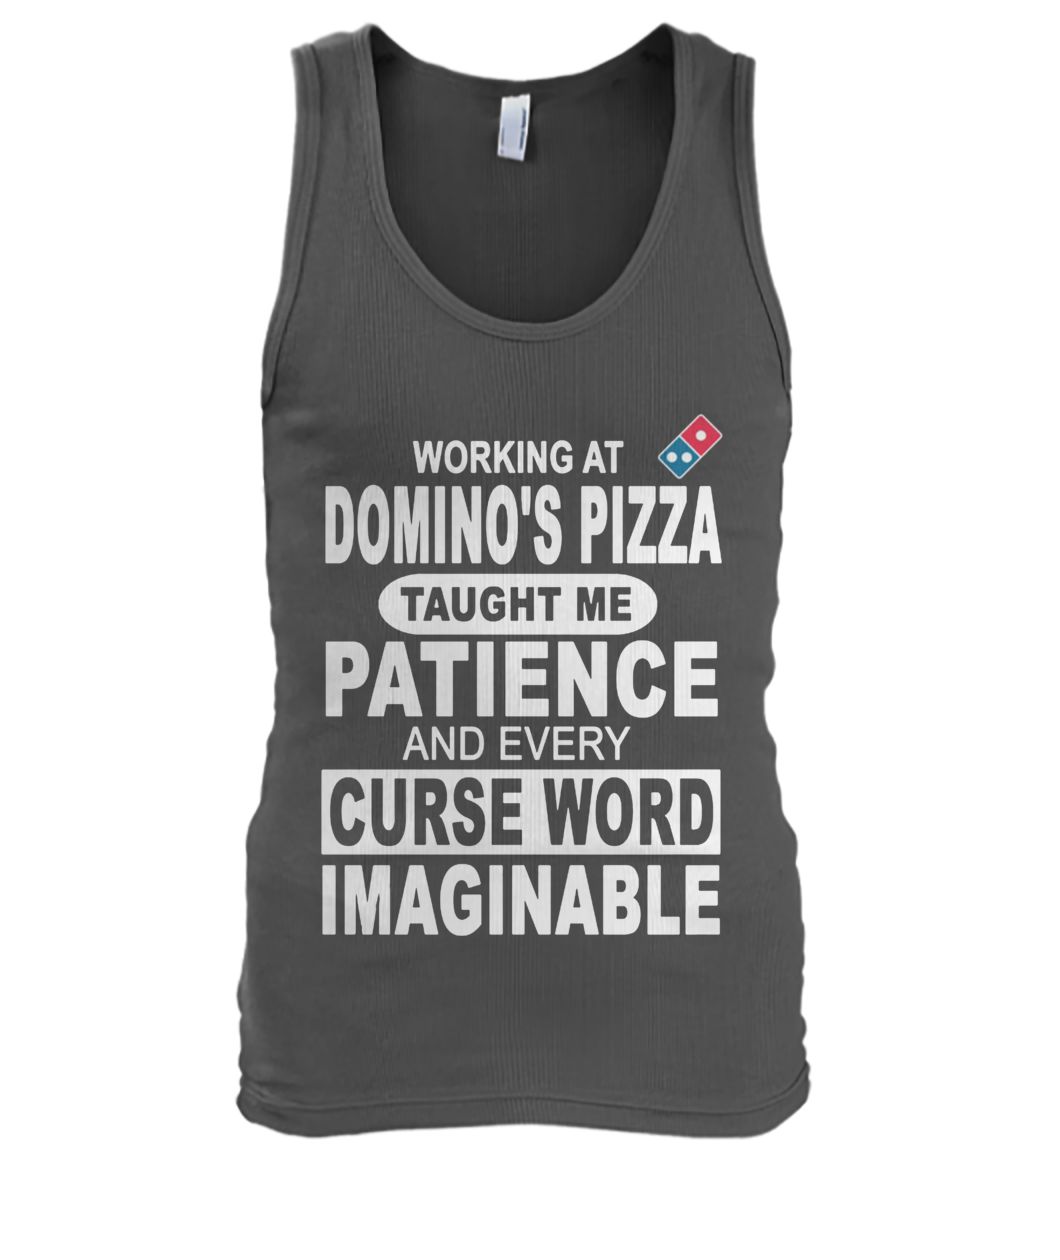 Working at domino's pizza taught me patience and curse word imaginable men's tank top